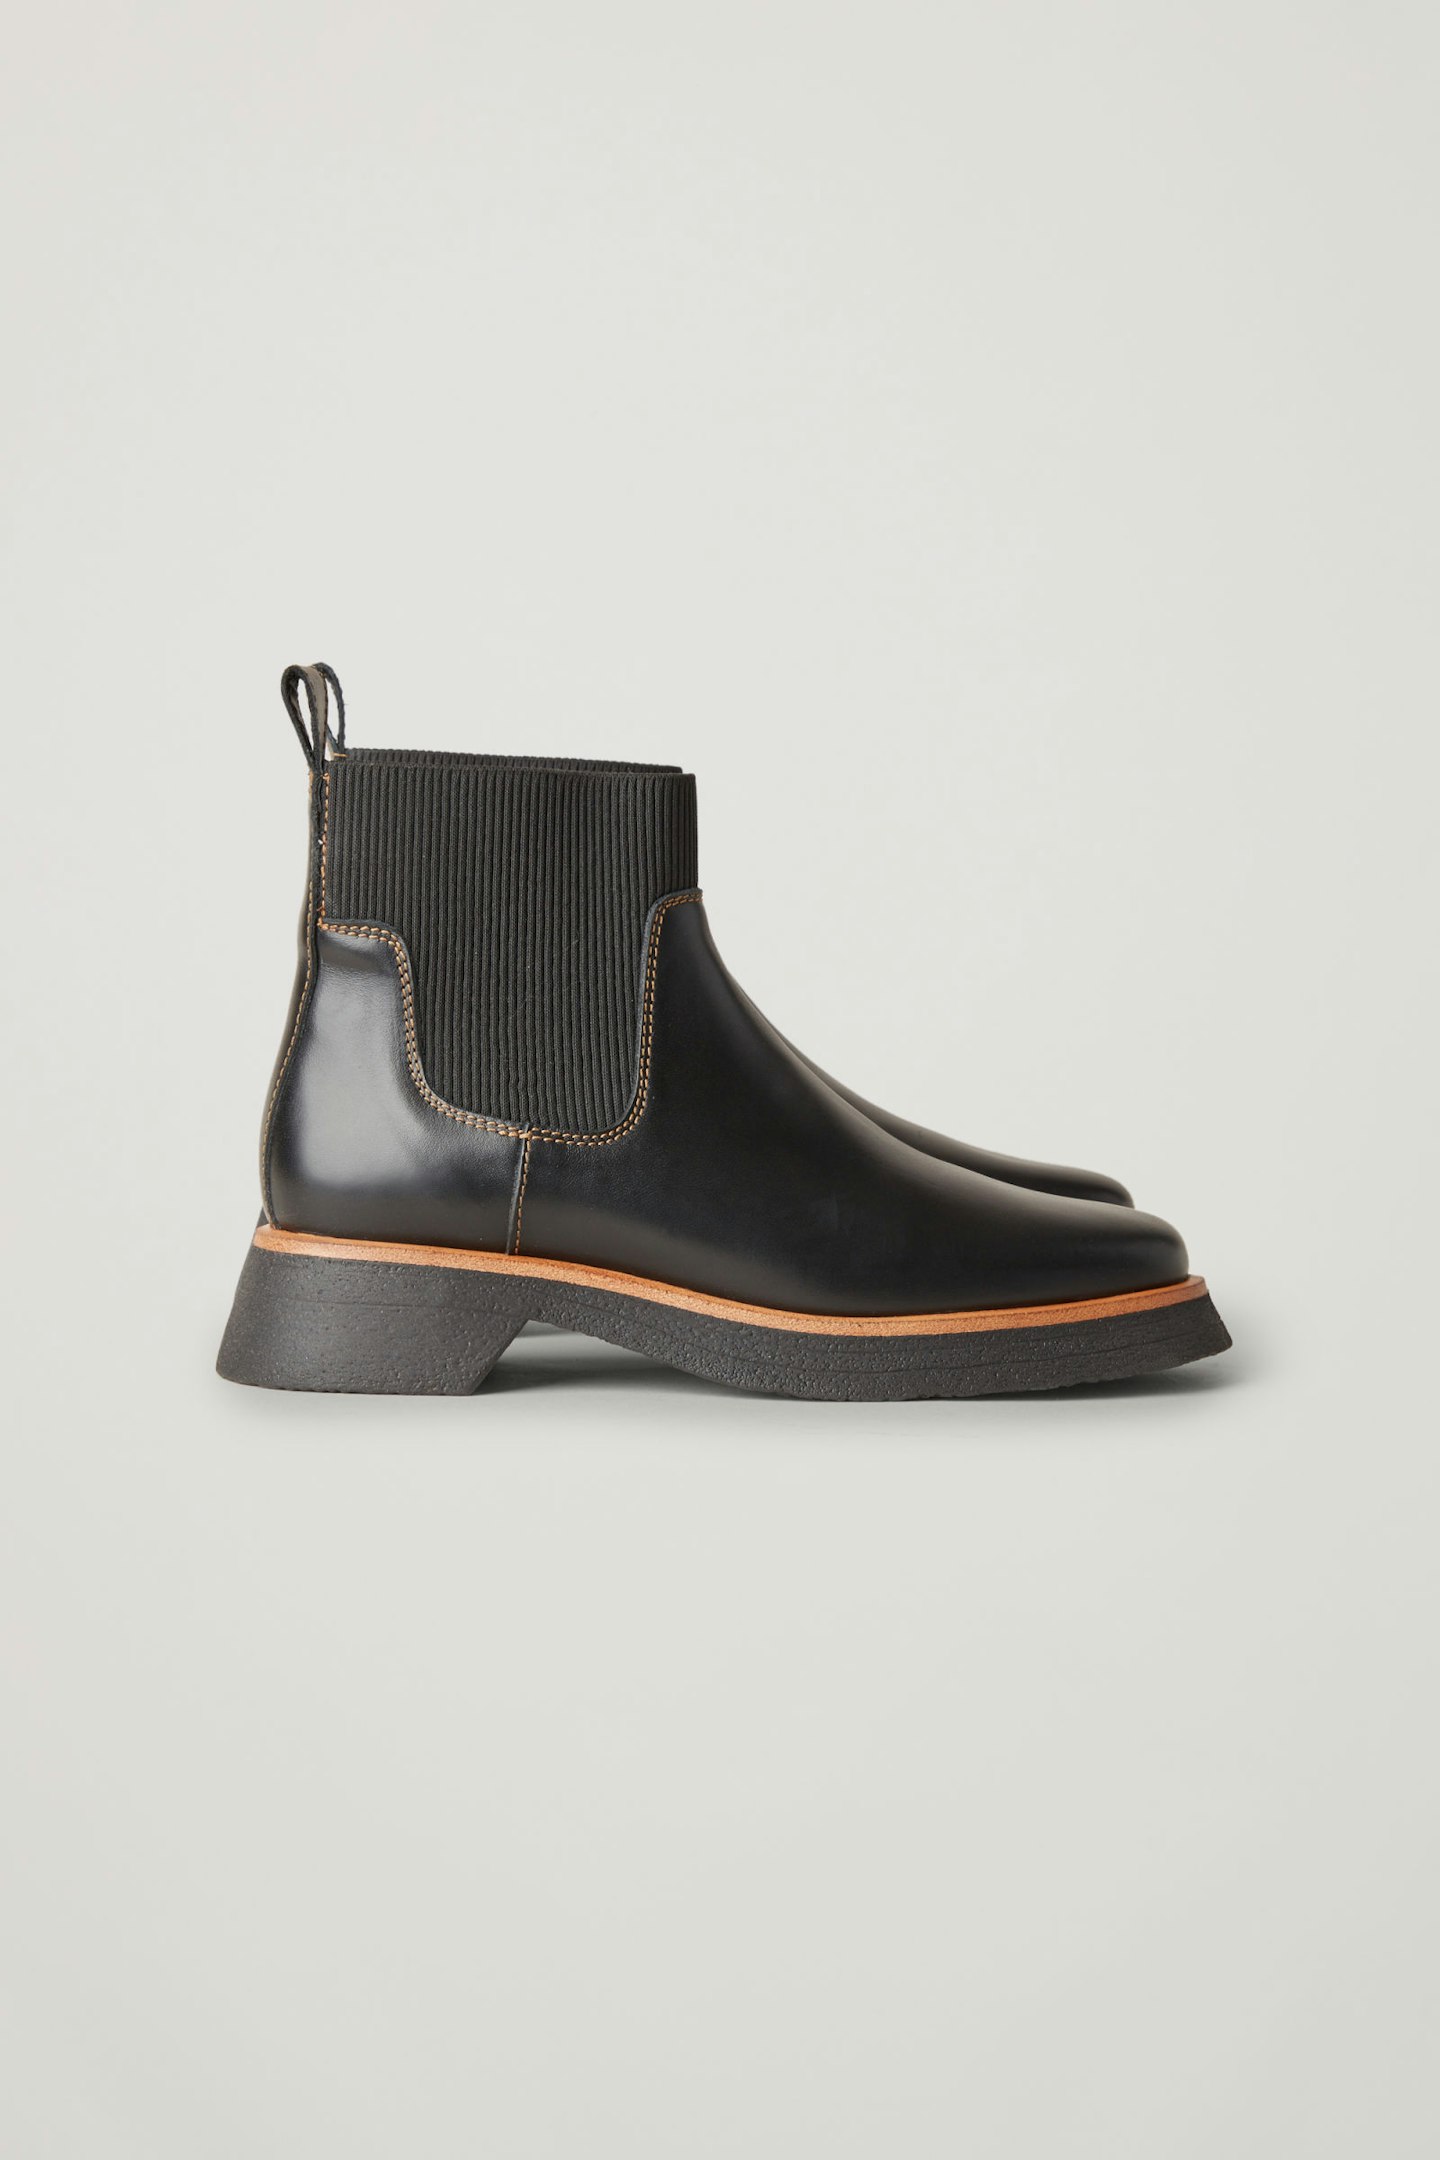 COS, Chunky Leather Chelsea Boots, £175